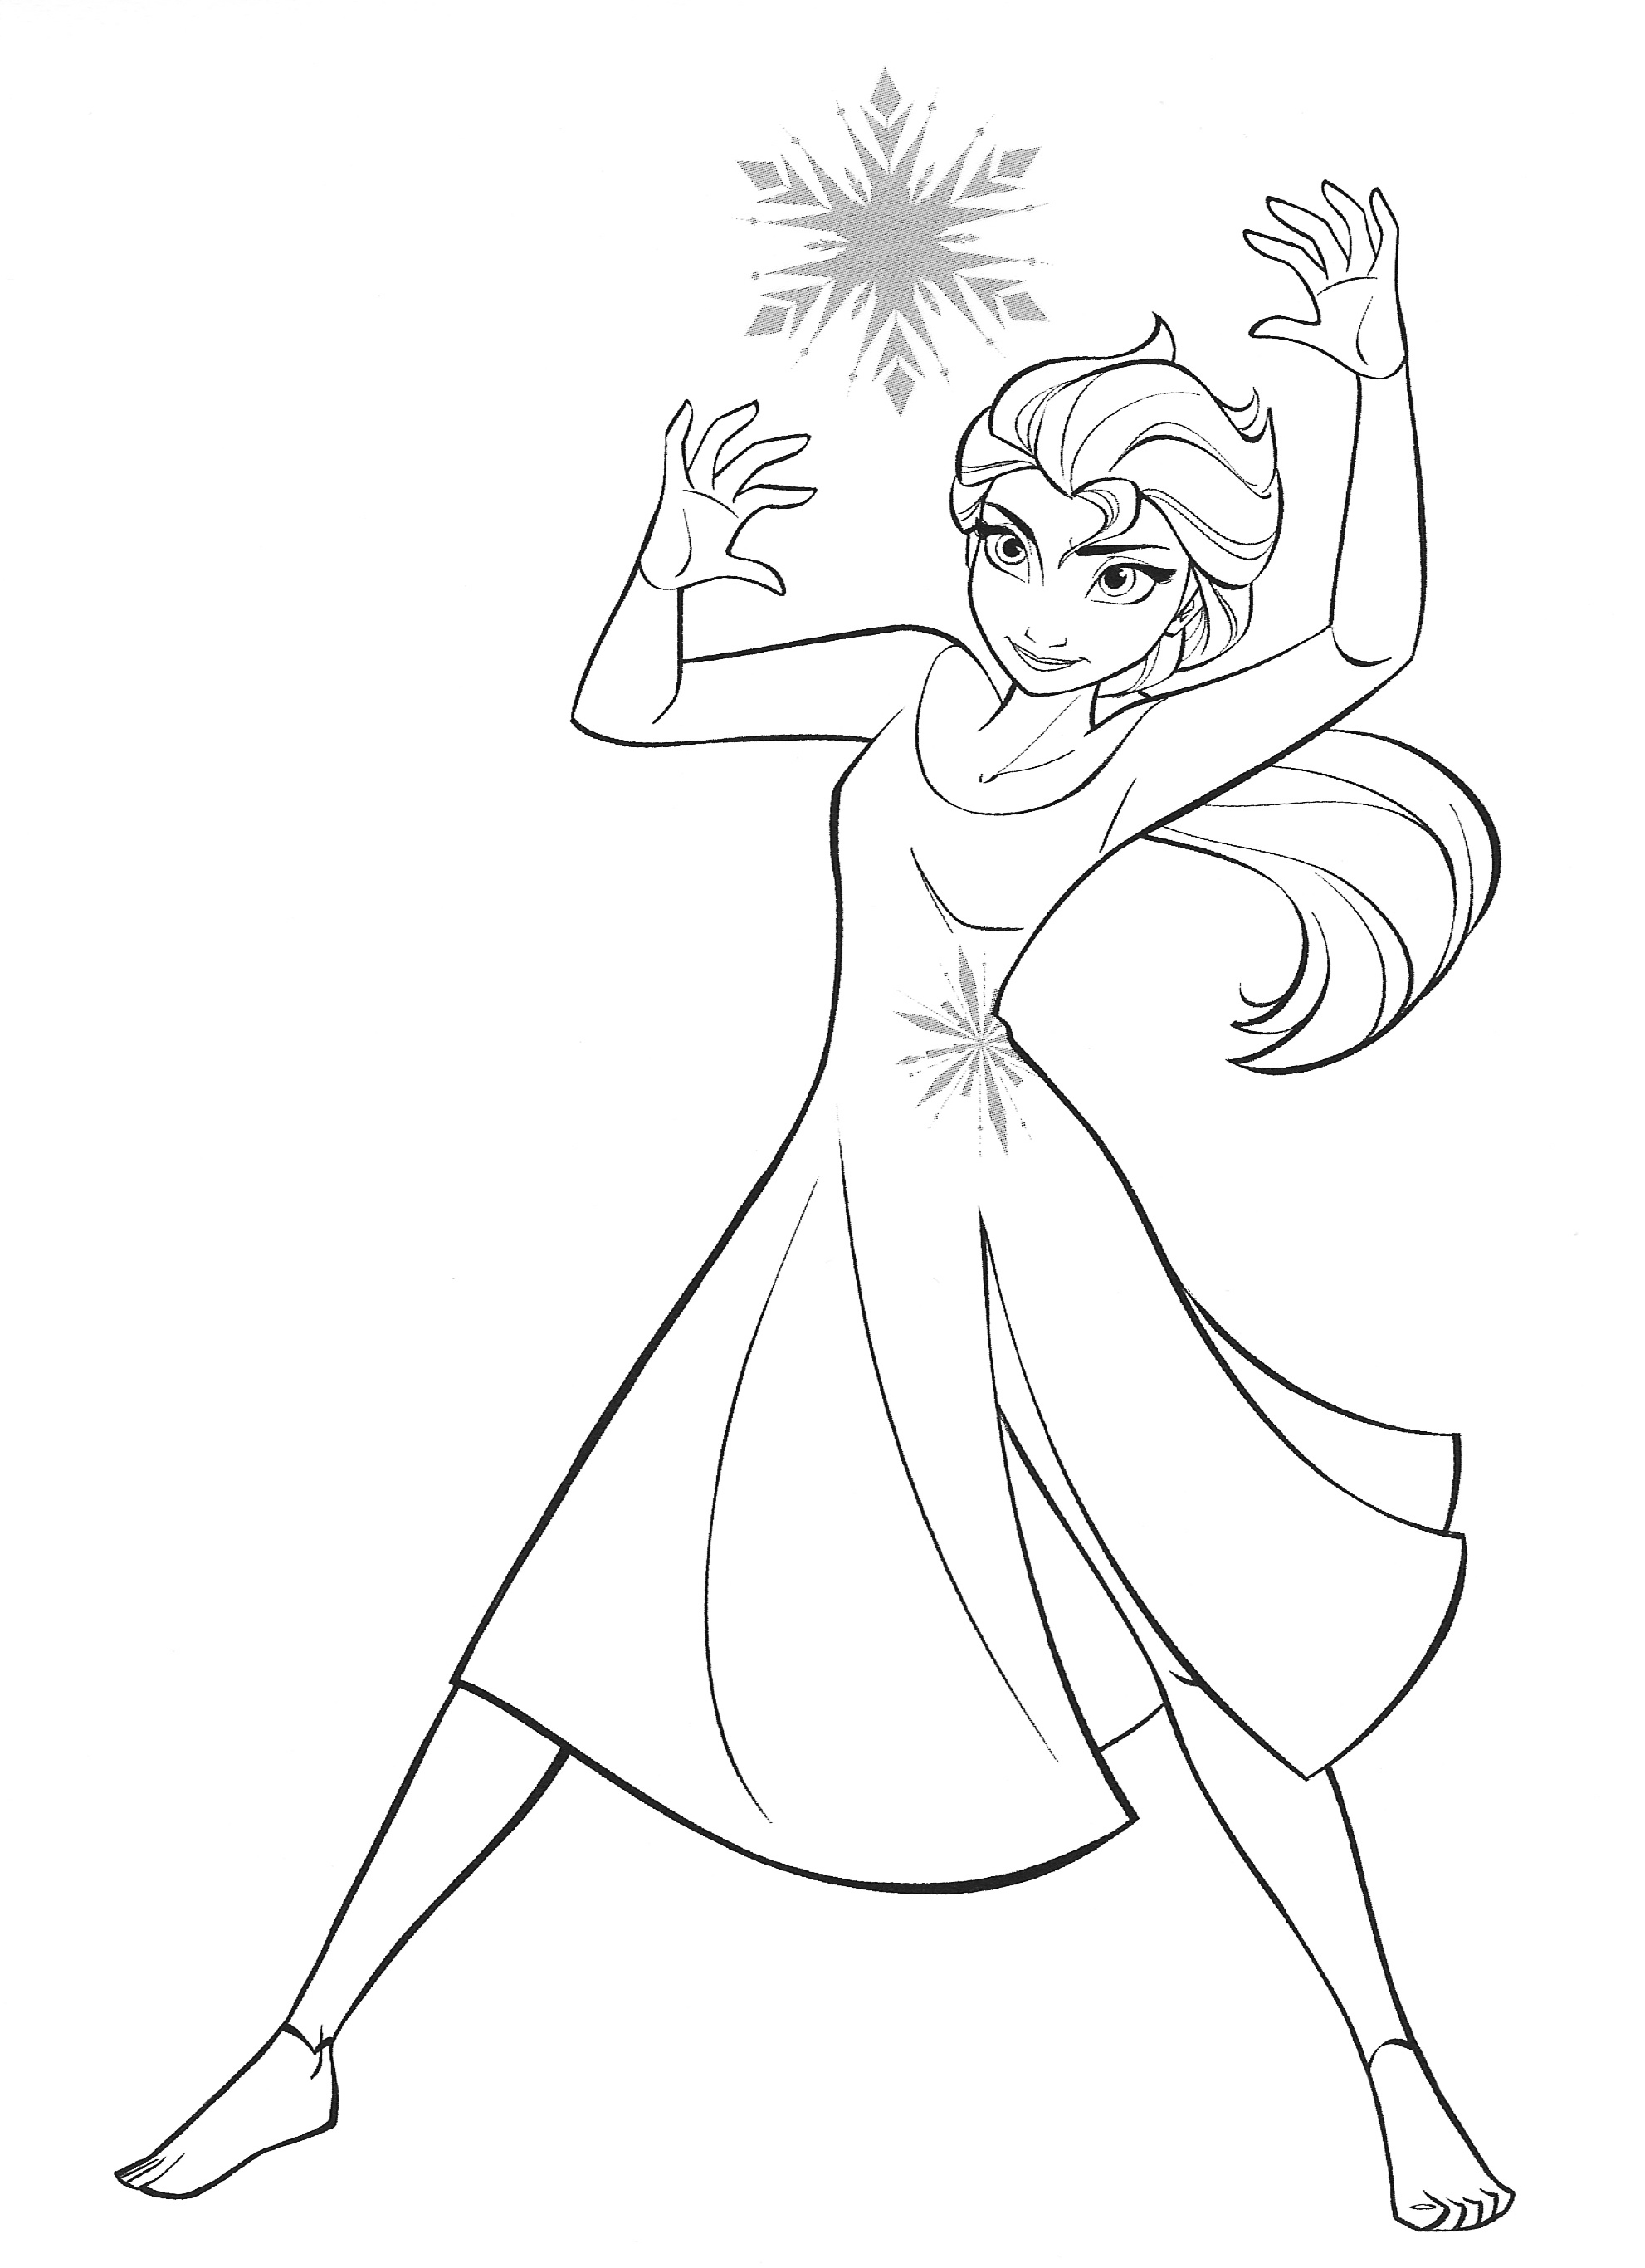 Cartoon Disney Coloring Pages Frozen 2 for Kids